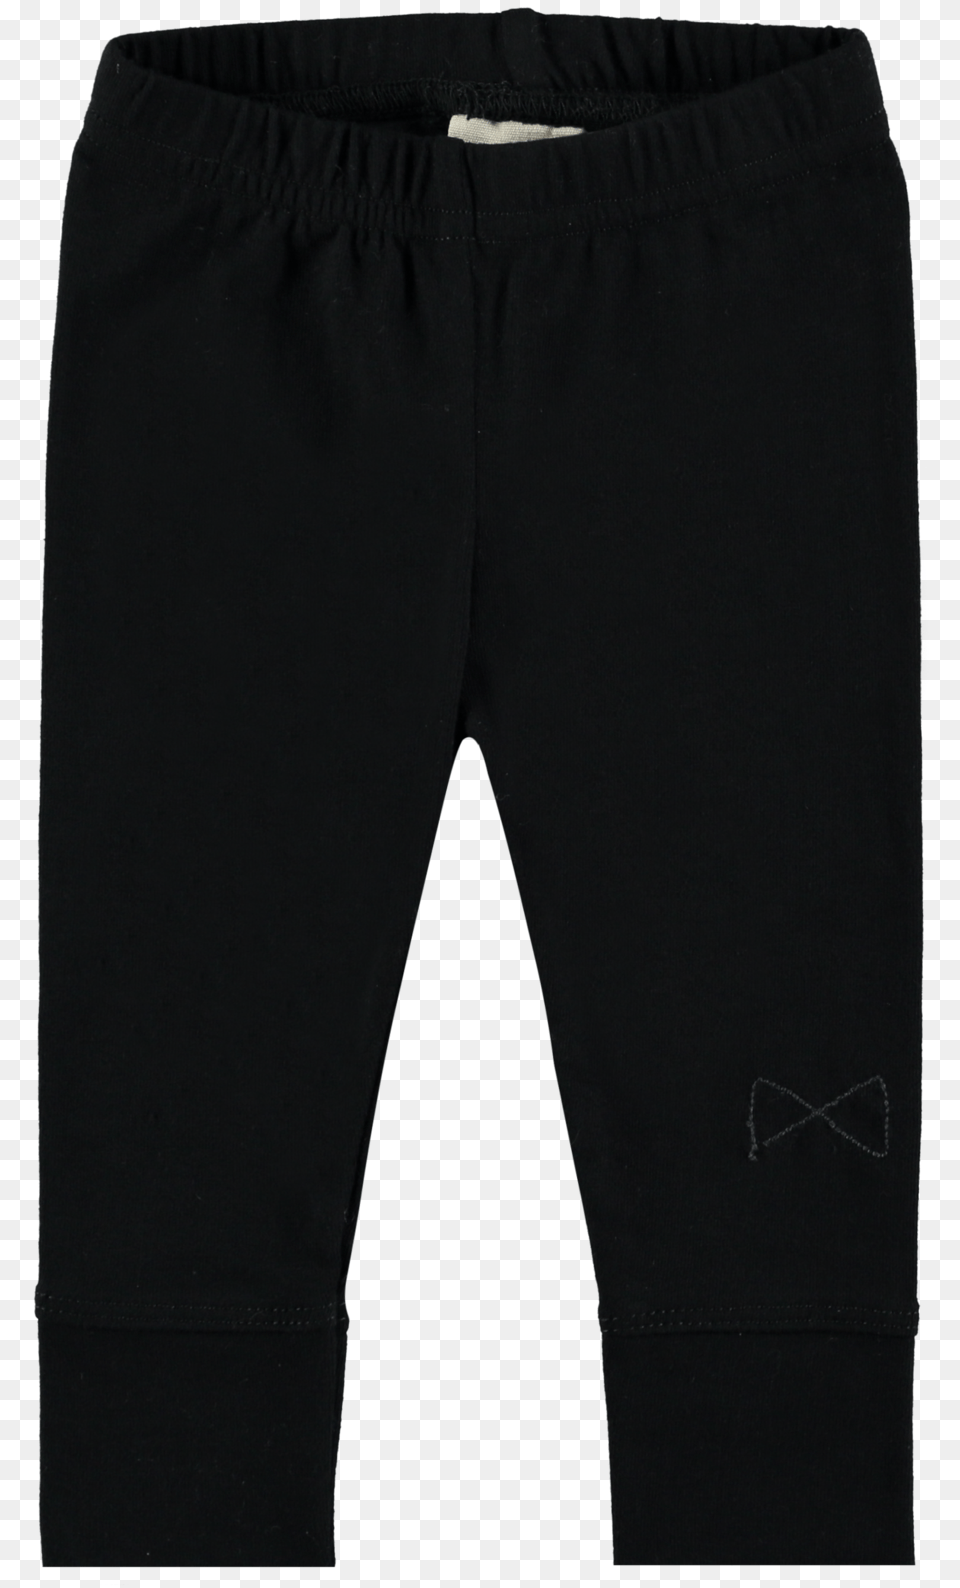 Black Jersey Pants By Mini Sibling Leggings, Clothing, Shorts, Jeans Free Transparent Png